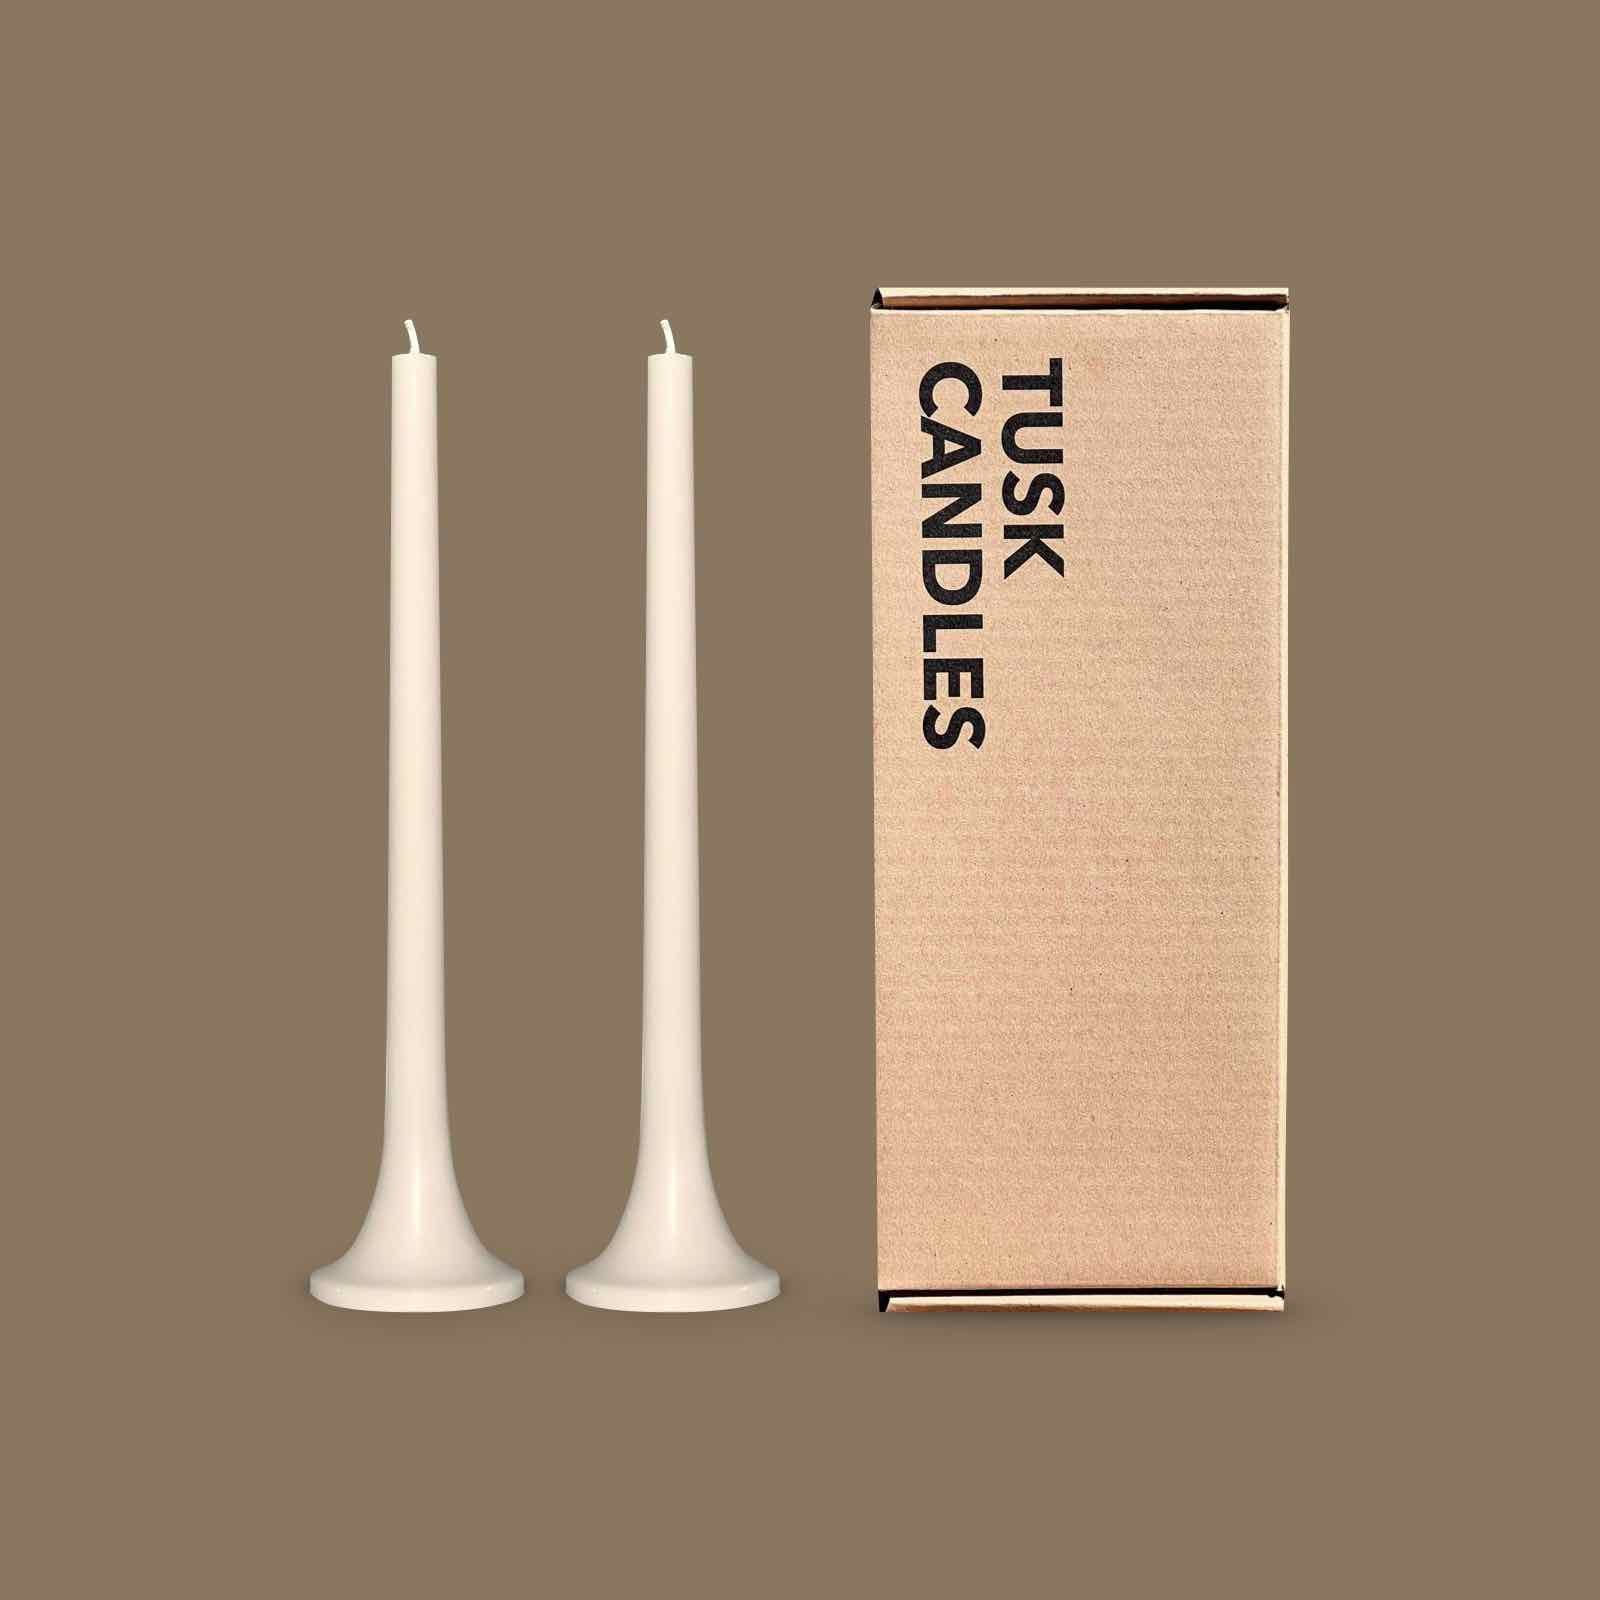 Taper candle gift set